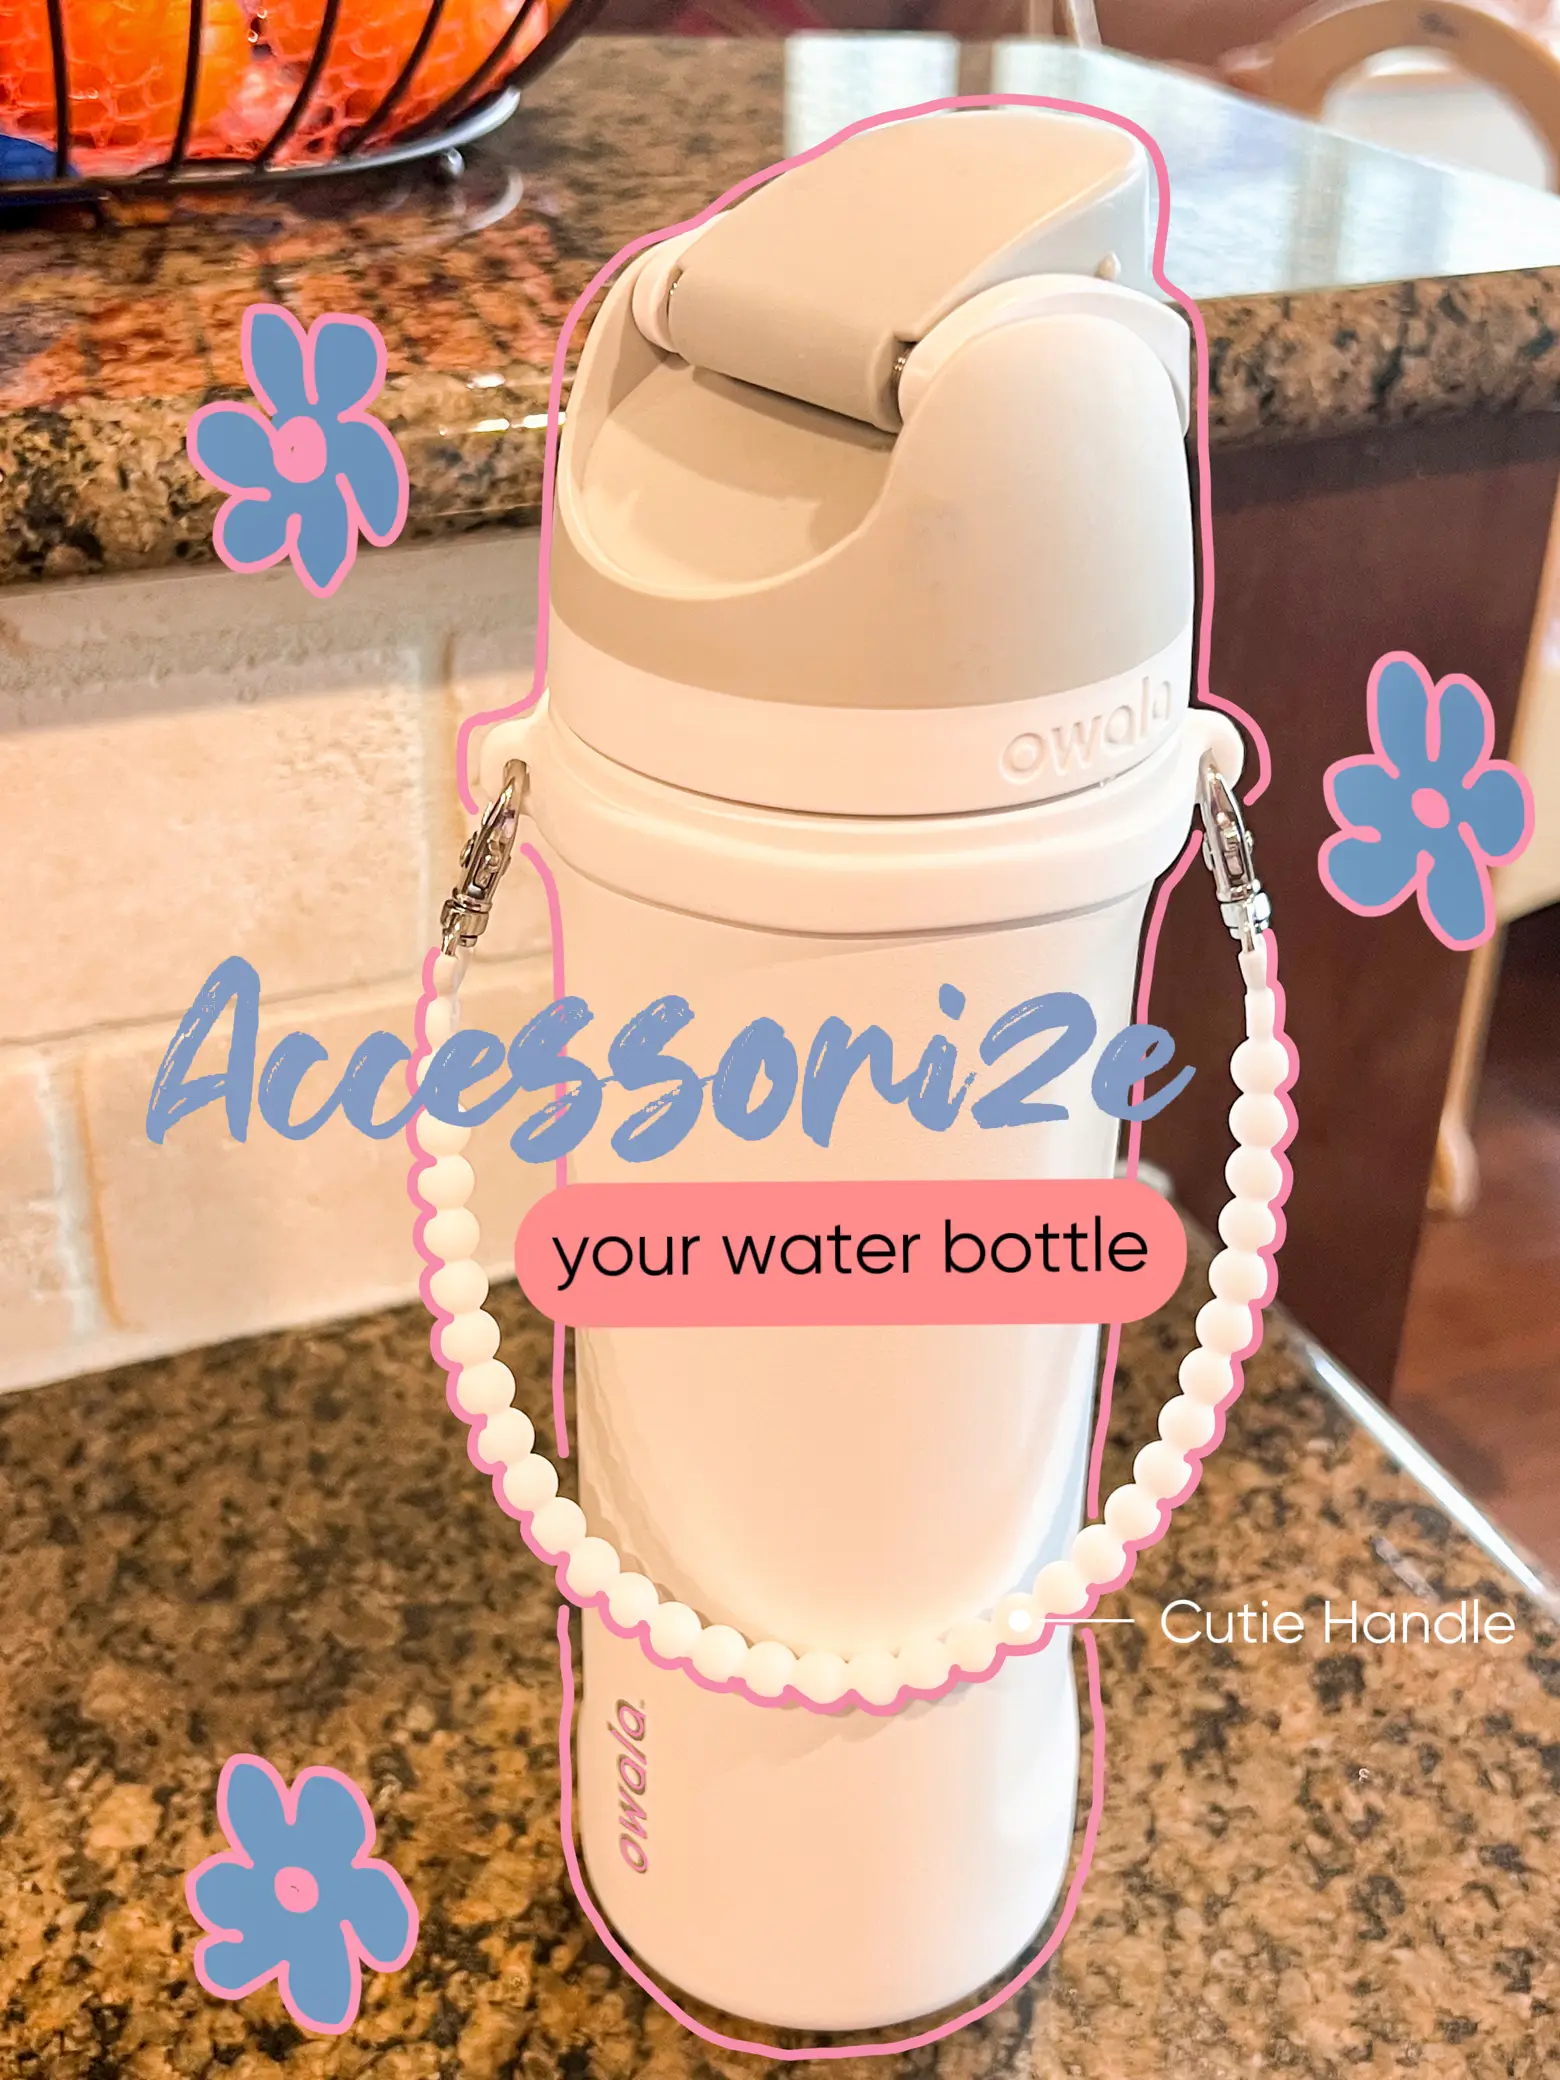 The water bottle accessory you need!! The Cutie Handle! #ryanandrose #, owala water bottle